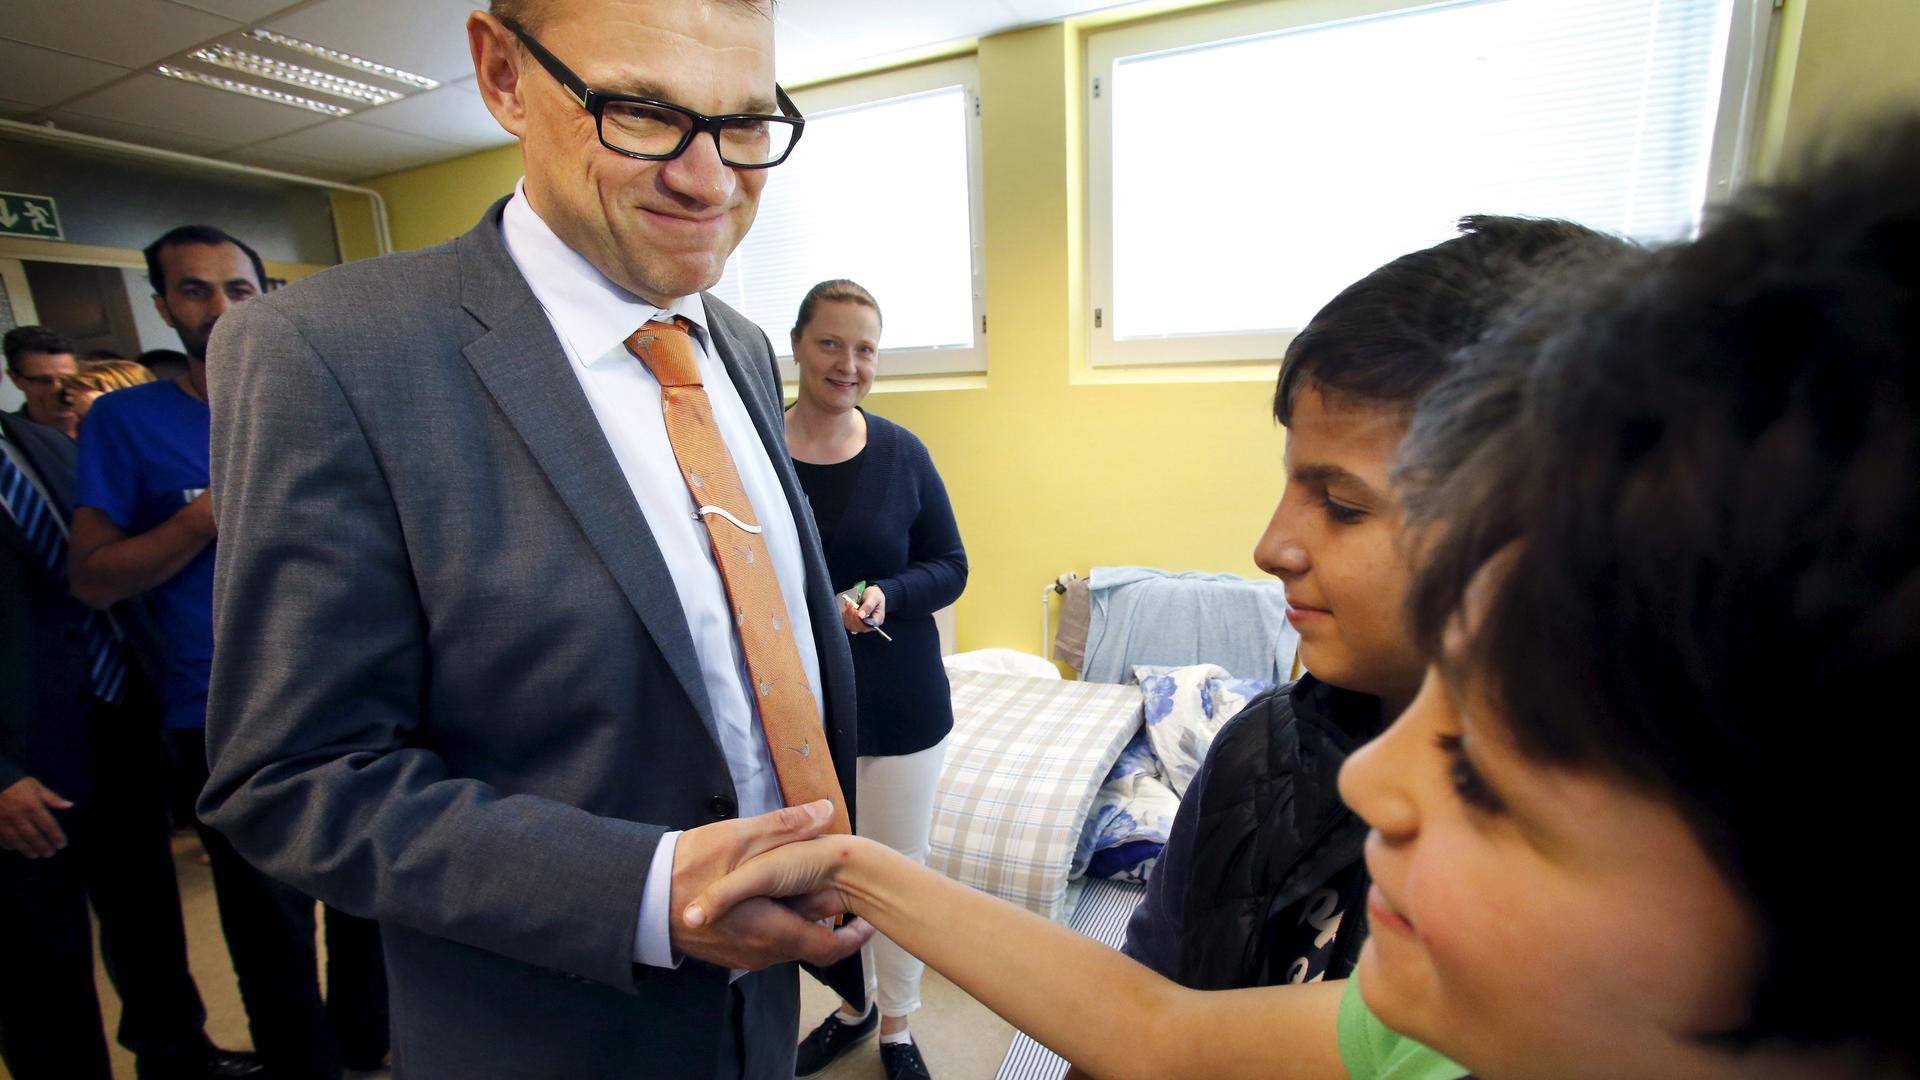 Finland's Prime Minister Juha Sipila visits a refugee reception center in Northern Finland.